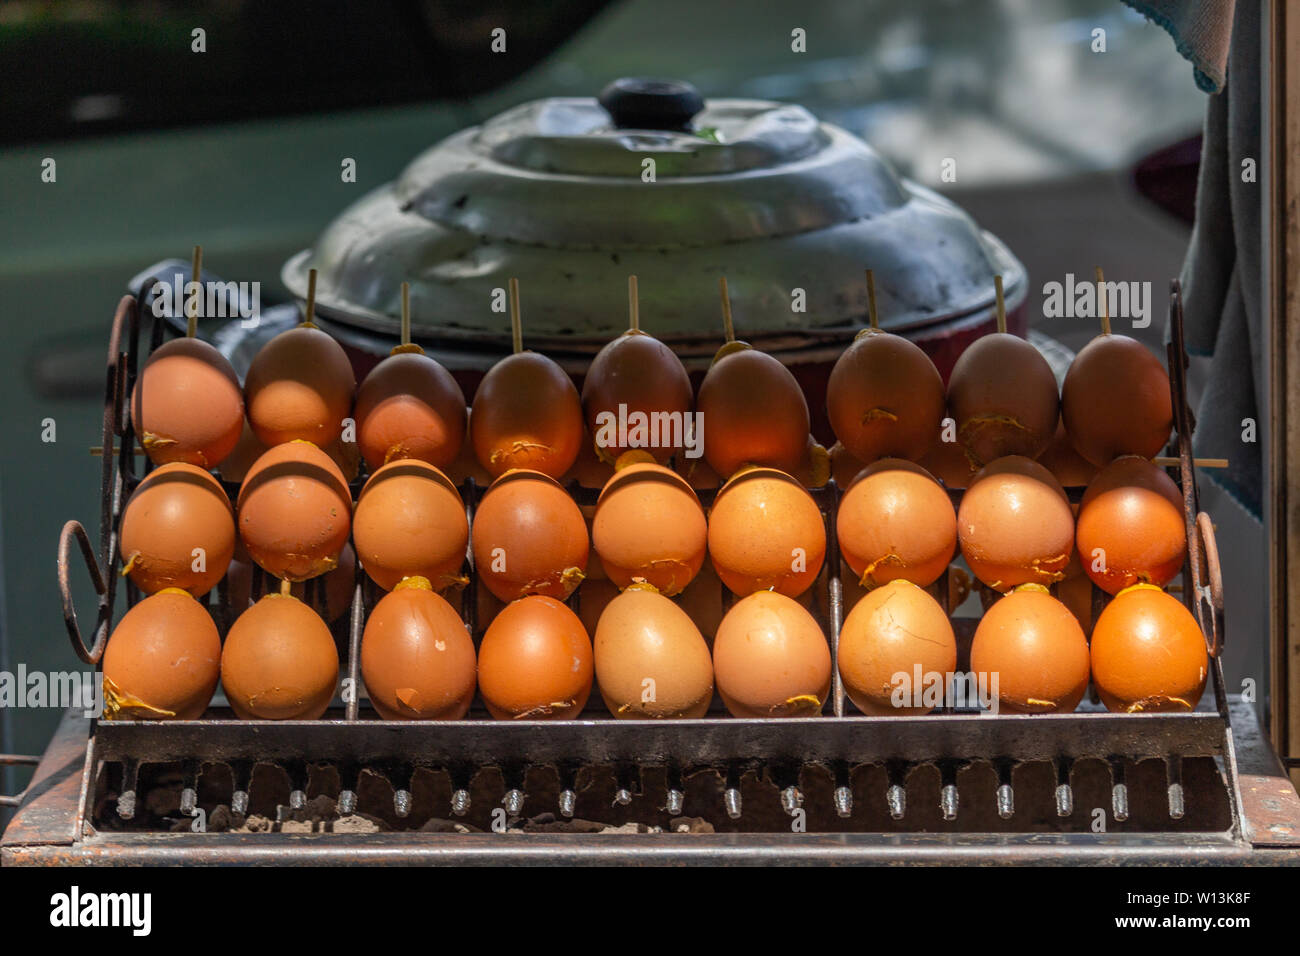 Many eggs exposed on a street food stall in Bangkok, Thailand Stock Photo